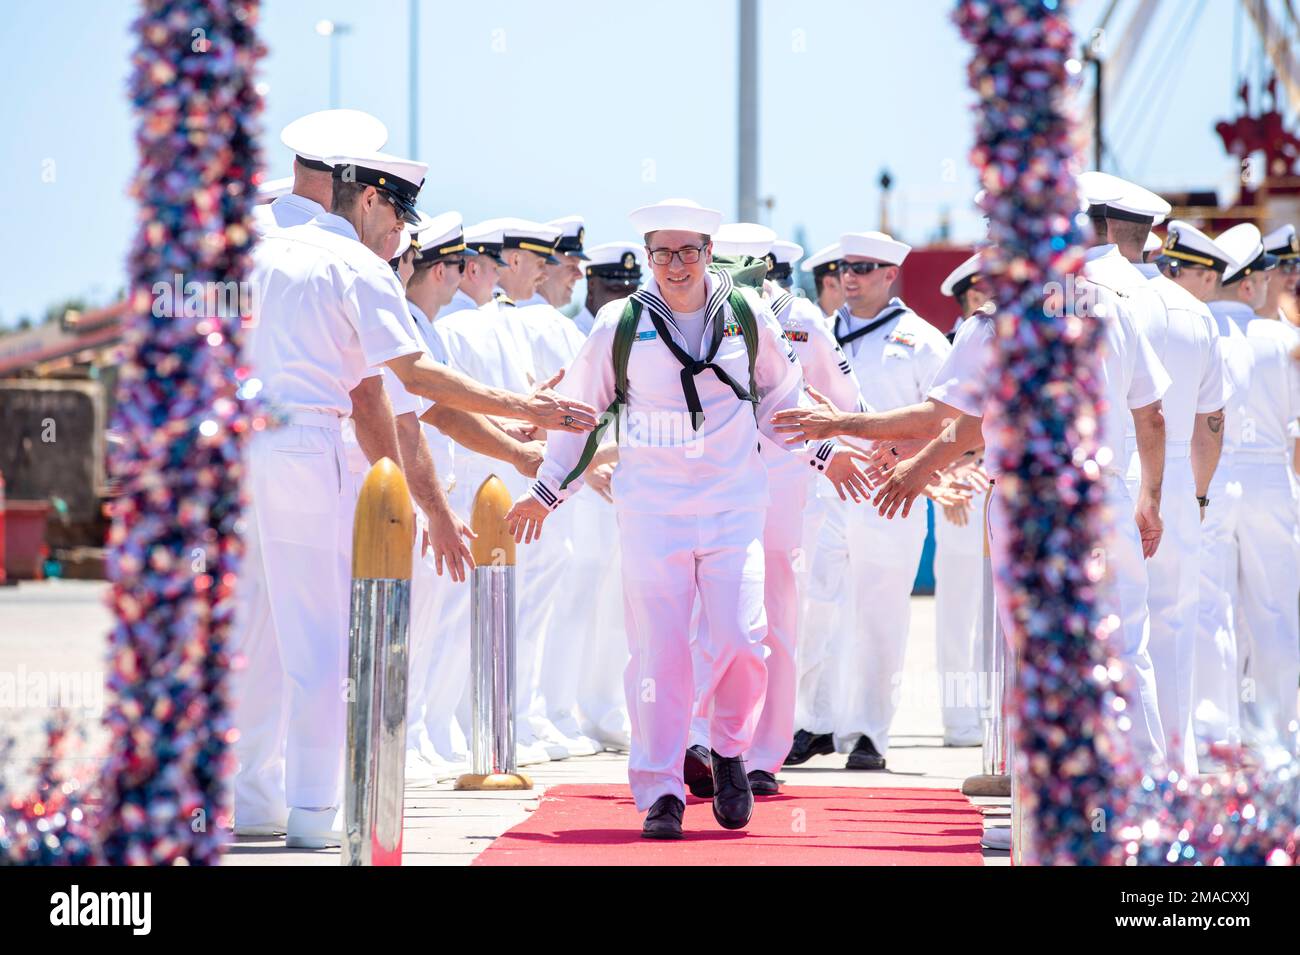 220512-N-XG173-1258 JOINT BASE PEARL HARBOR-HICKAM (May. 25, 2022) Machinists Mate (Nuclear) 2nd Class Jon Tedder, from Atlanta, assigned to the Virginia-class fast-attack submarine USS North Carolina (SSN 777) returns home after the boat returns to Joint Base Pearl Harbor-Hickam from deployment in the 7th Fleet area of responsibility. The Virginia-class fast-attack submarine USS North Carolina (SSN 777) returns to Joint Base Pearl Harbor-Hickam from deployment in the 7th Fleet area of responsibility. North Carolina performed a full spectrum of operations, including anti-submarine and anti-sur Stock Photo